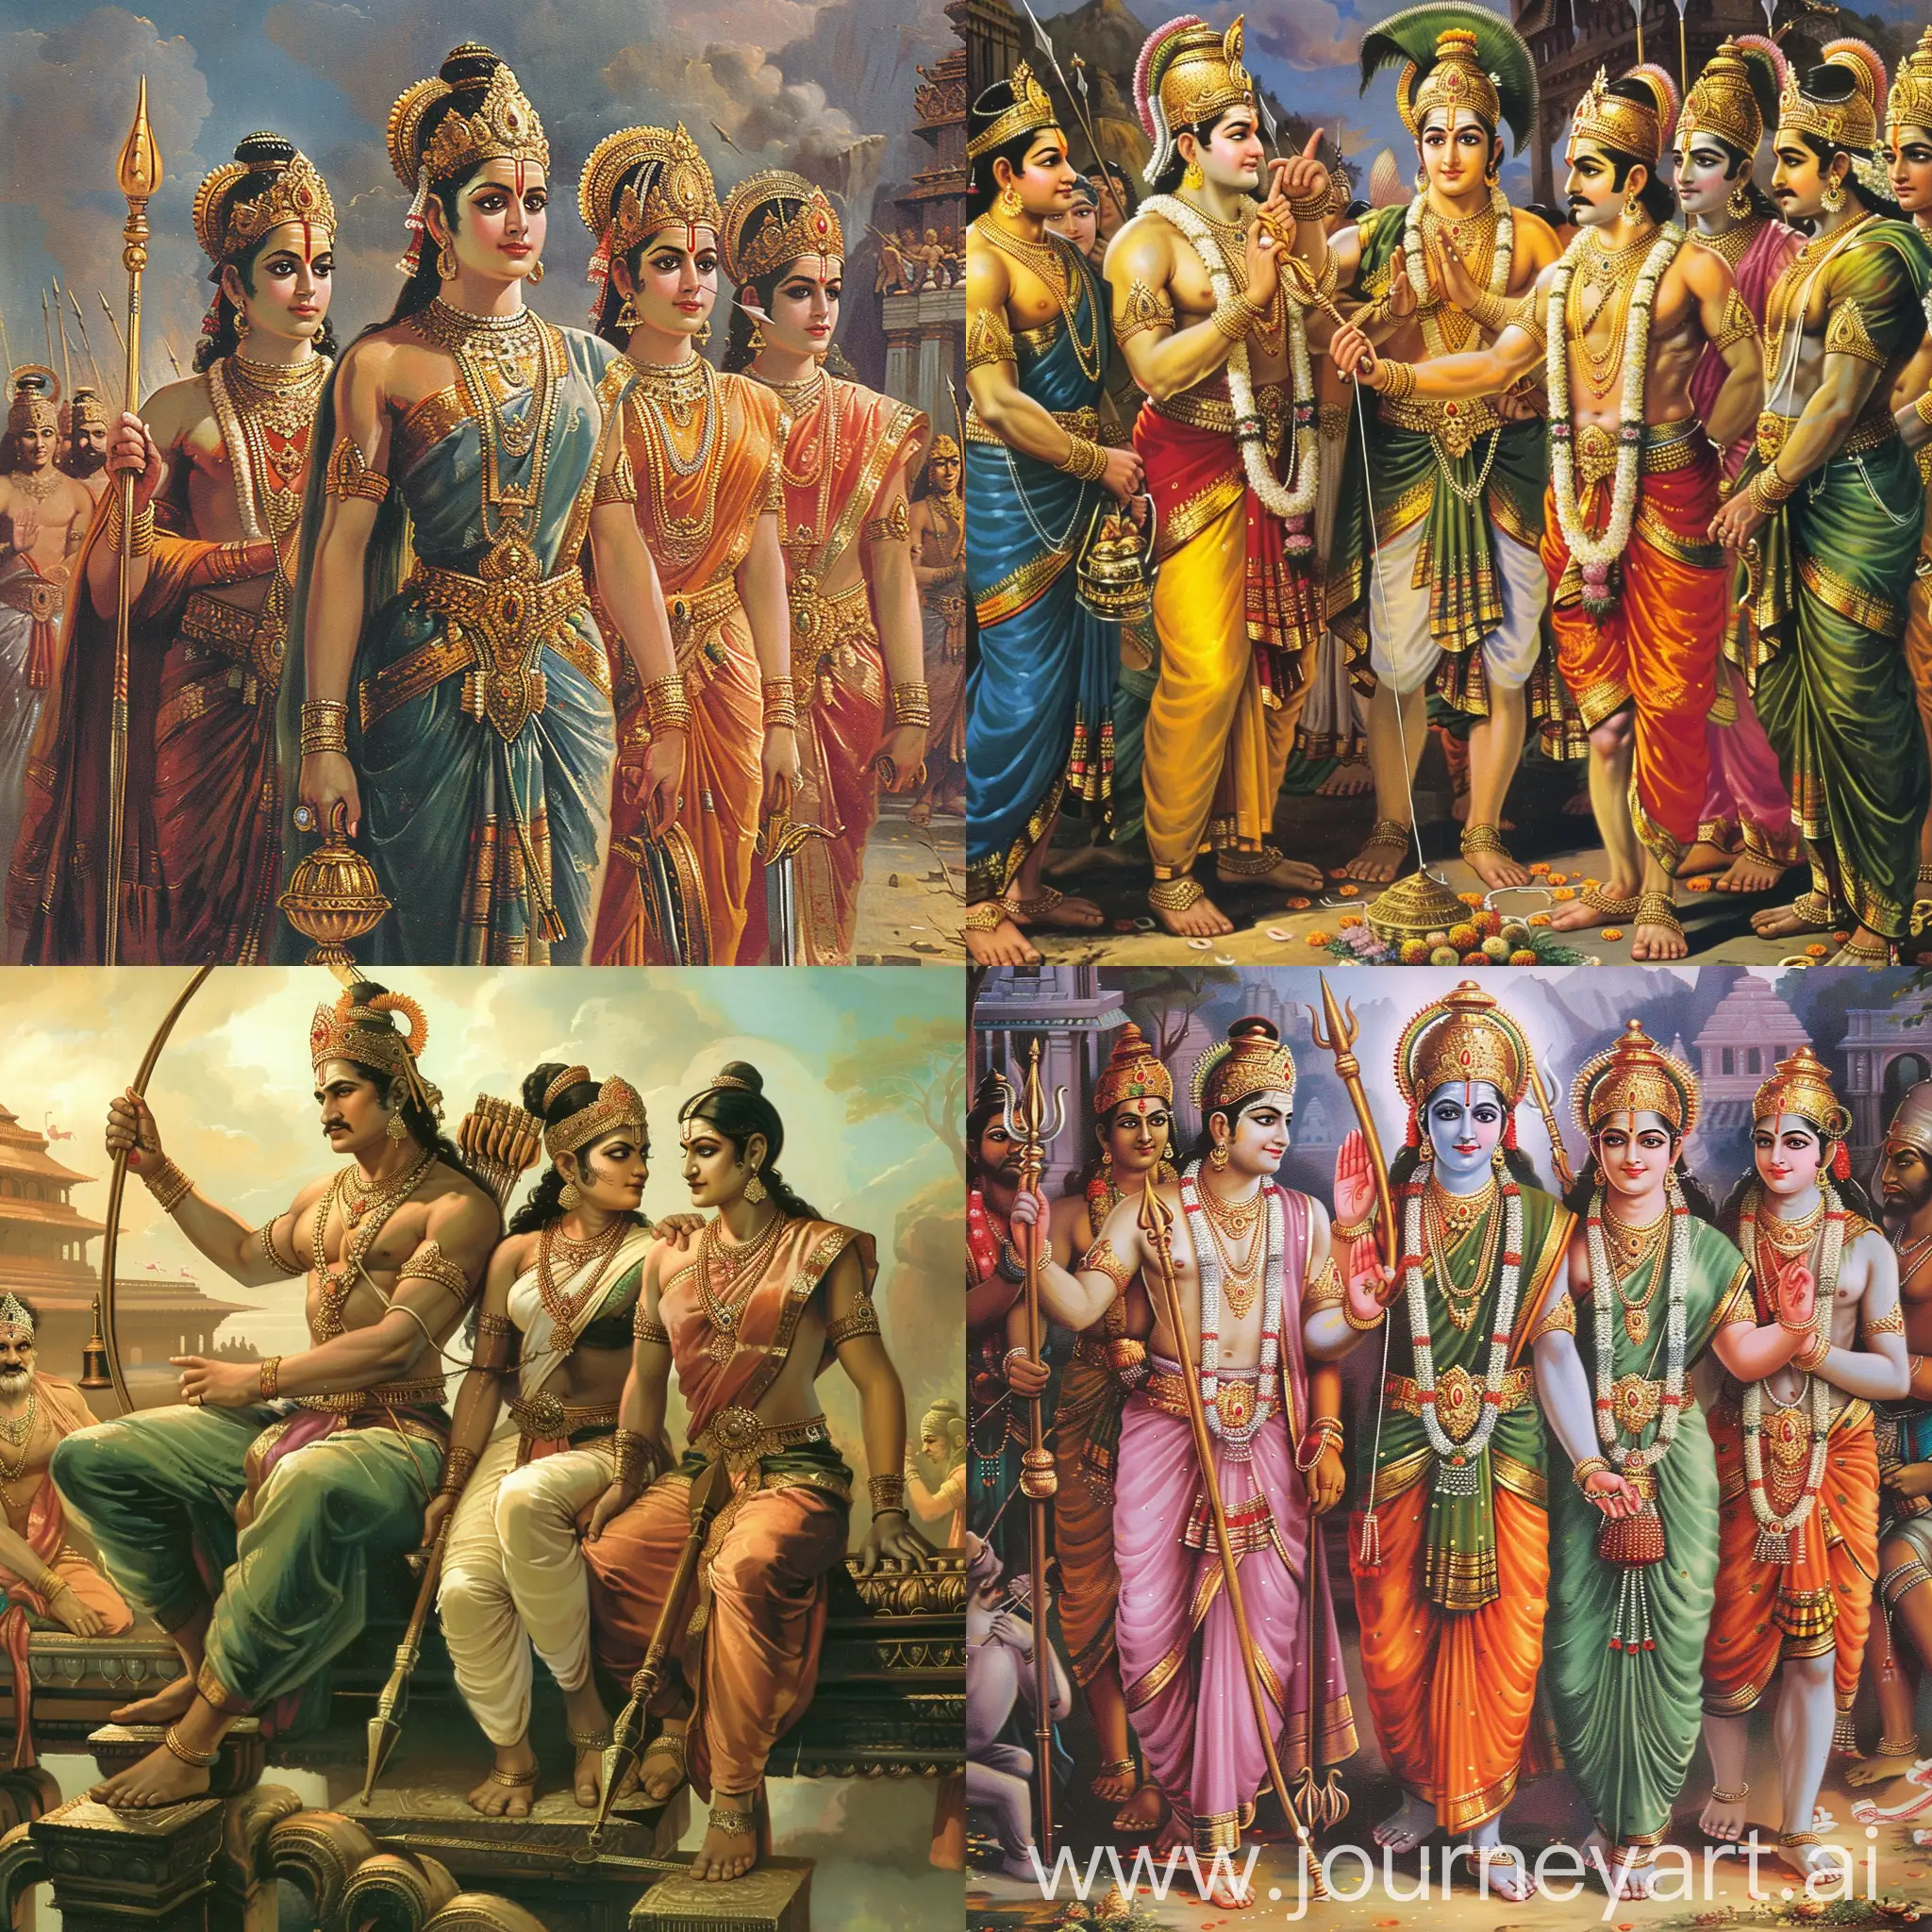 Epic-Battle-of-Ramayana-Divine-Confrontation-and-Heroic-Deeds